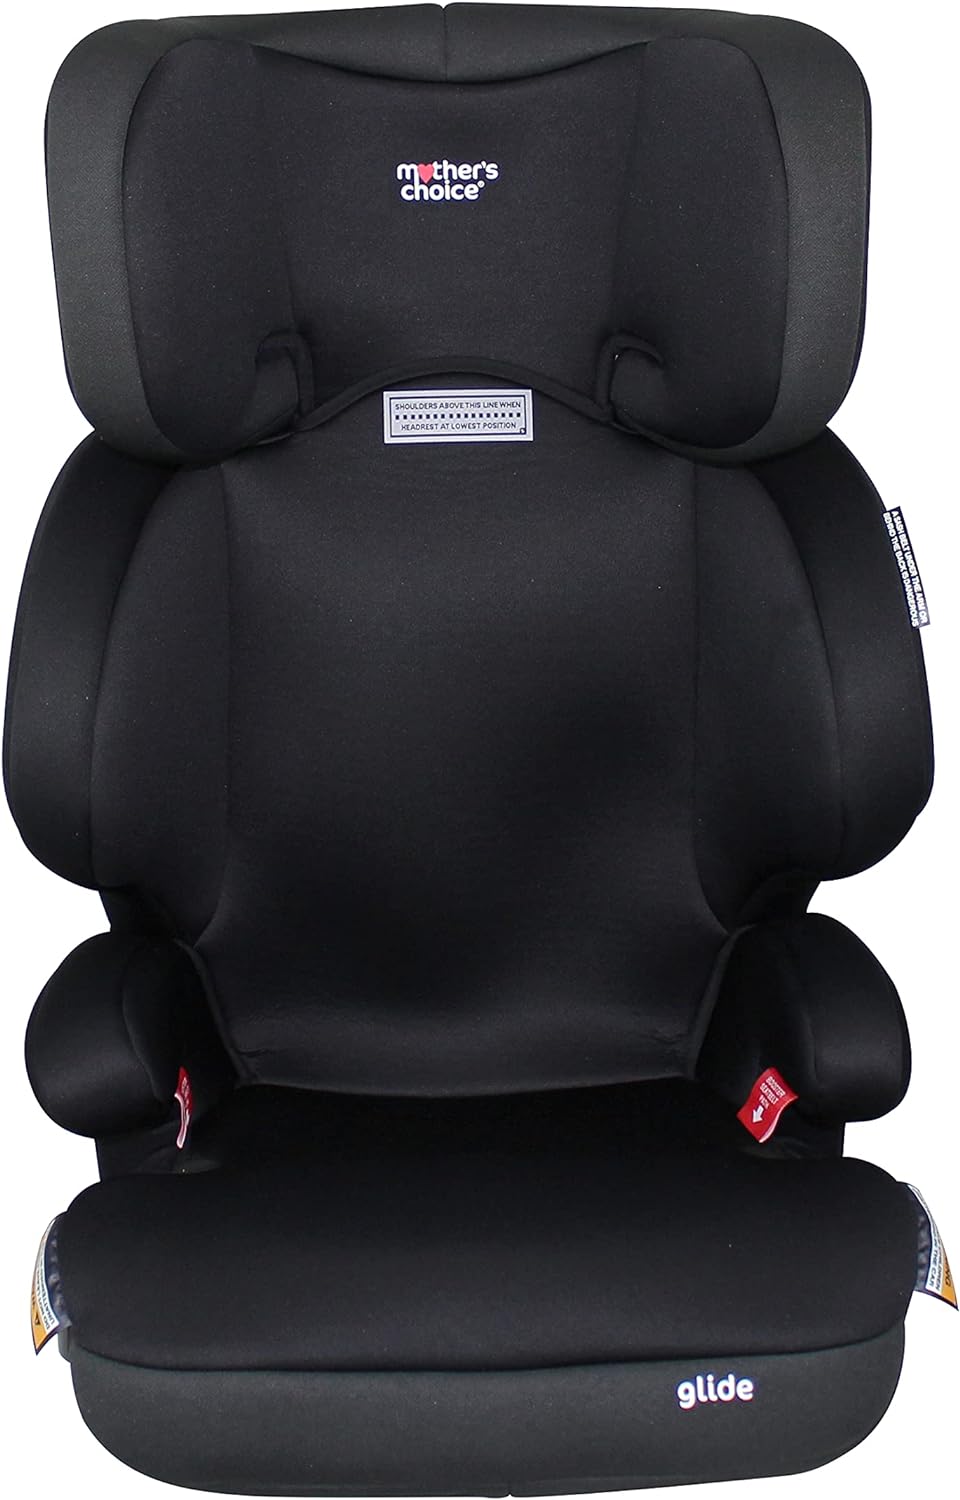 Mother's Choice Glide Booster Seat, 4-8 years